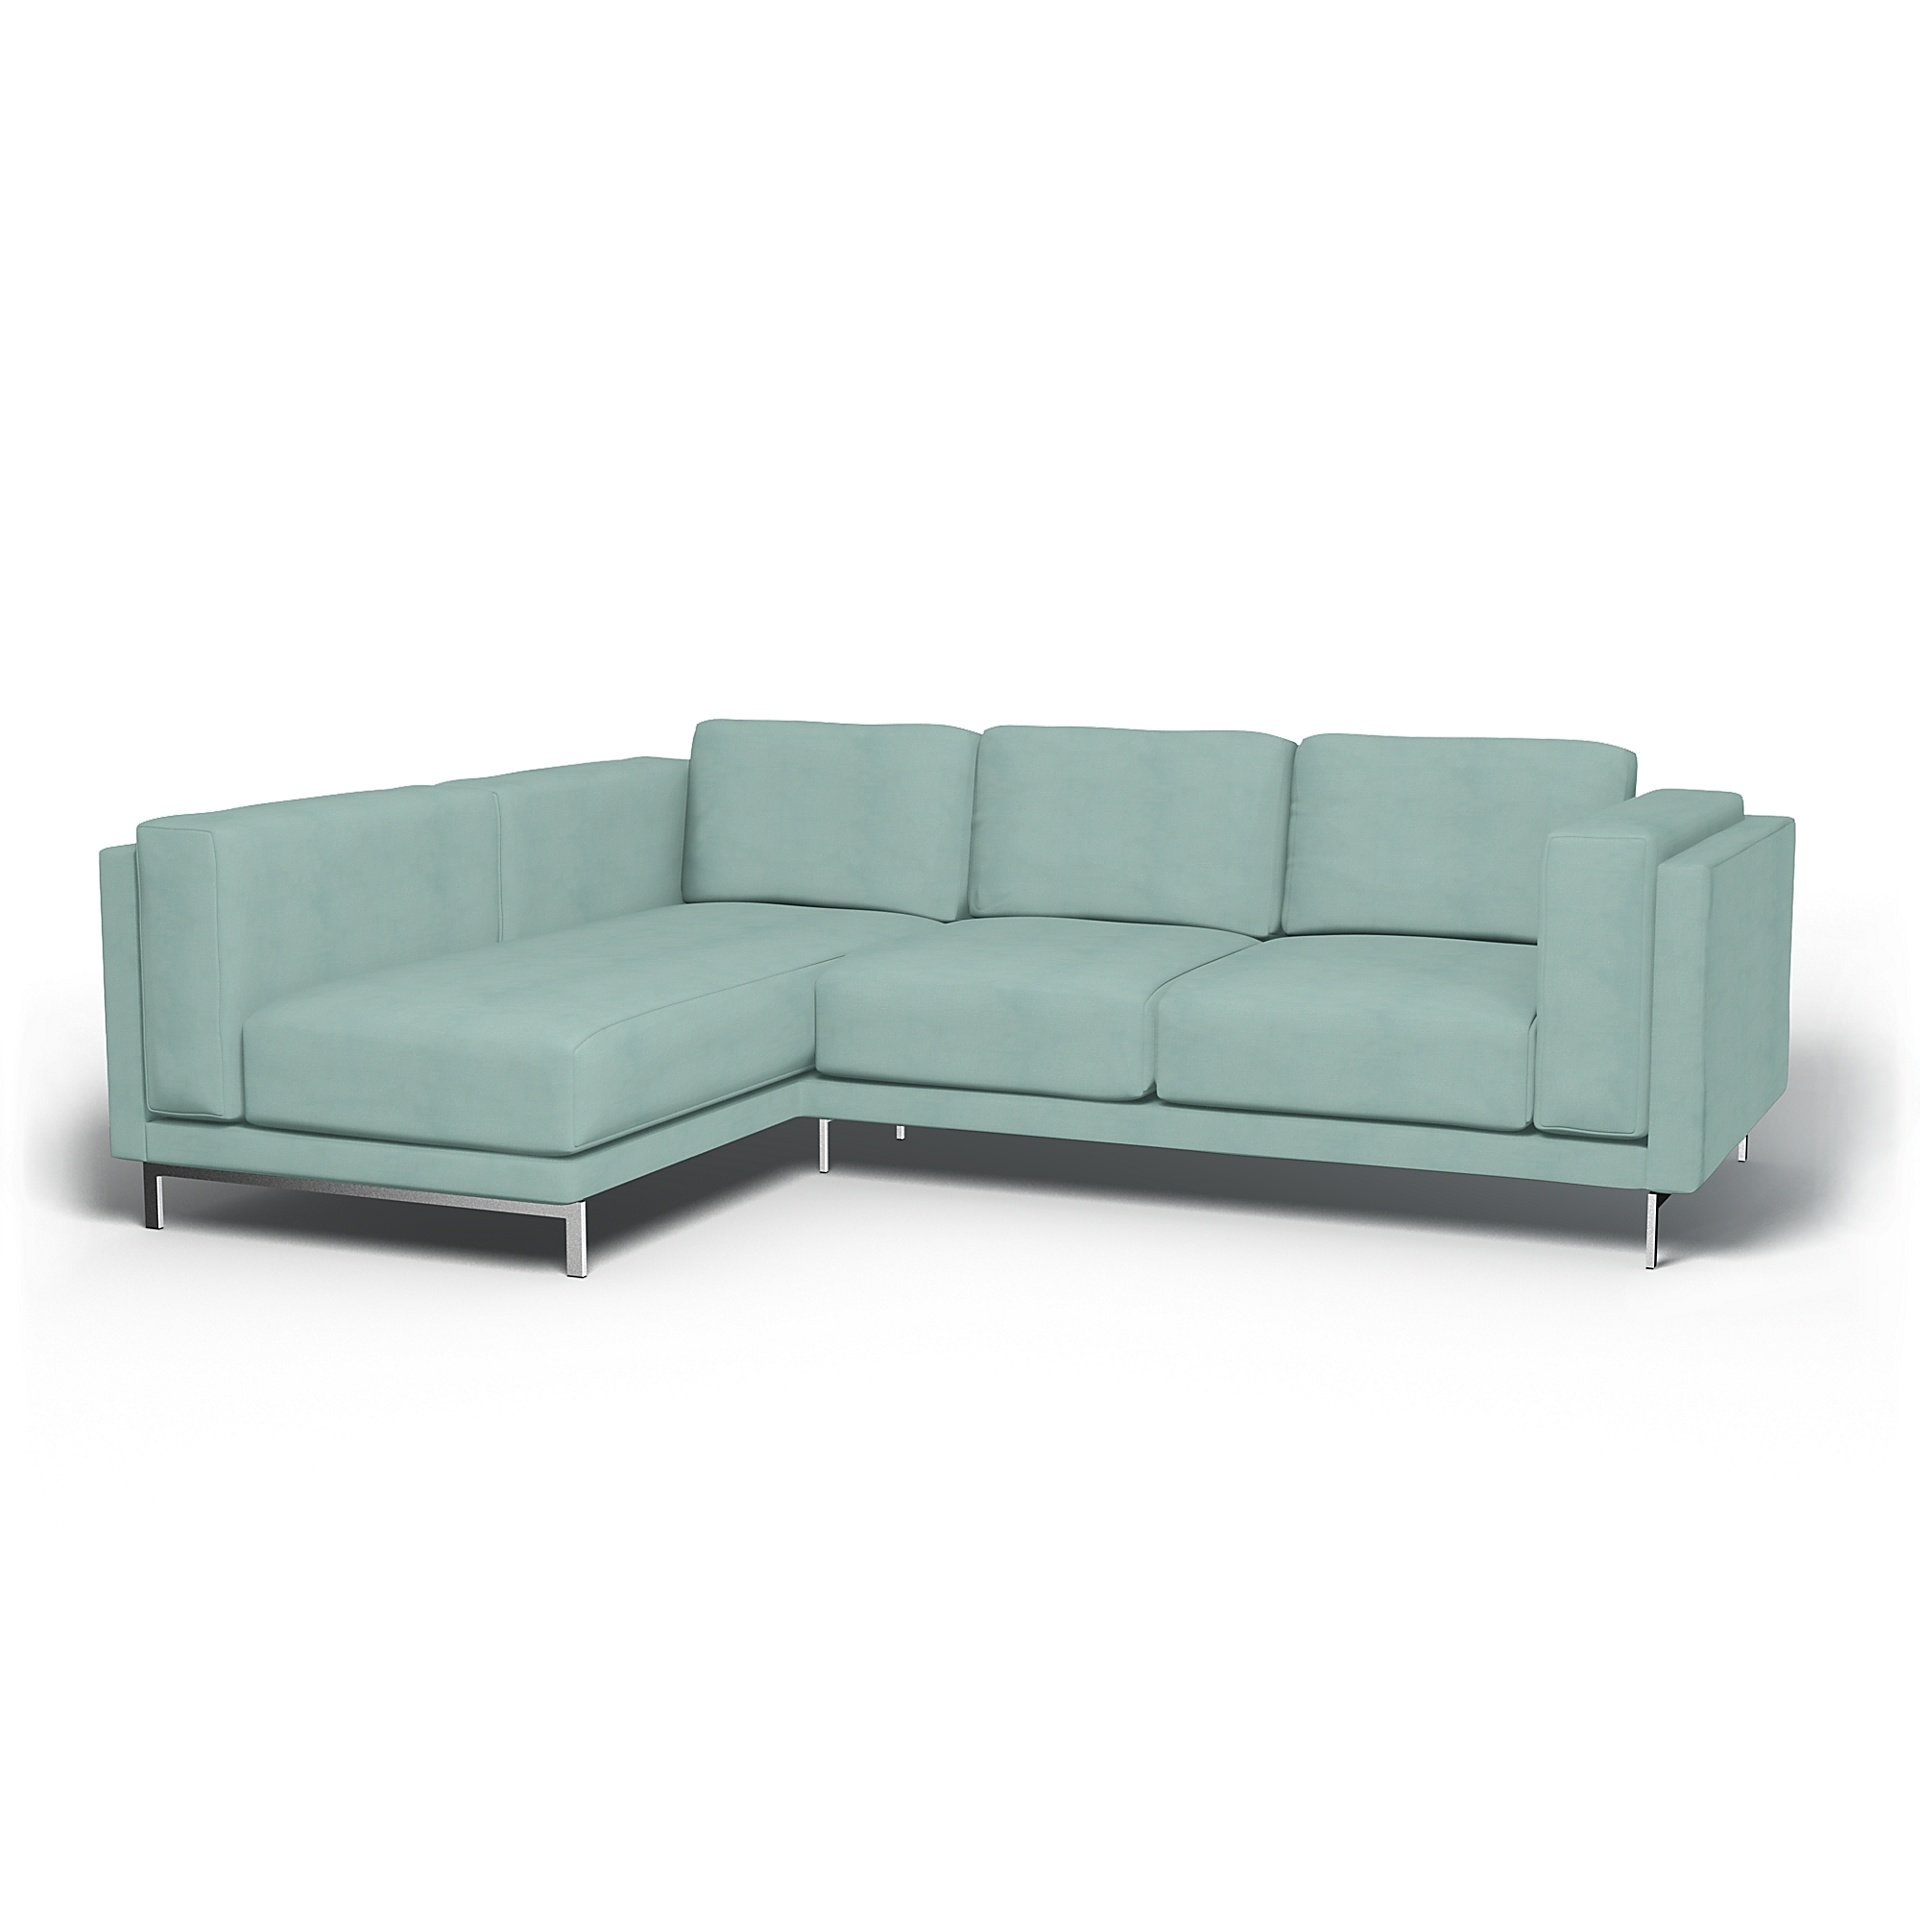 IKEA - Nockeby 3 Seater Sofa with Left Chaise Cover, Mineral Blue, Linen - Bemz